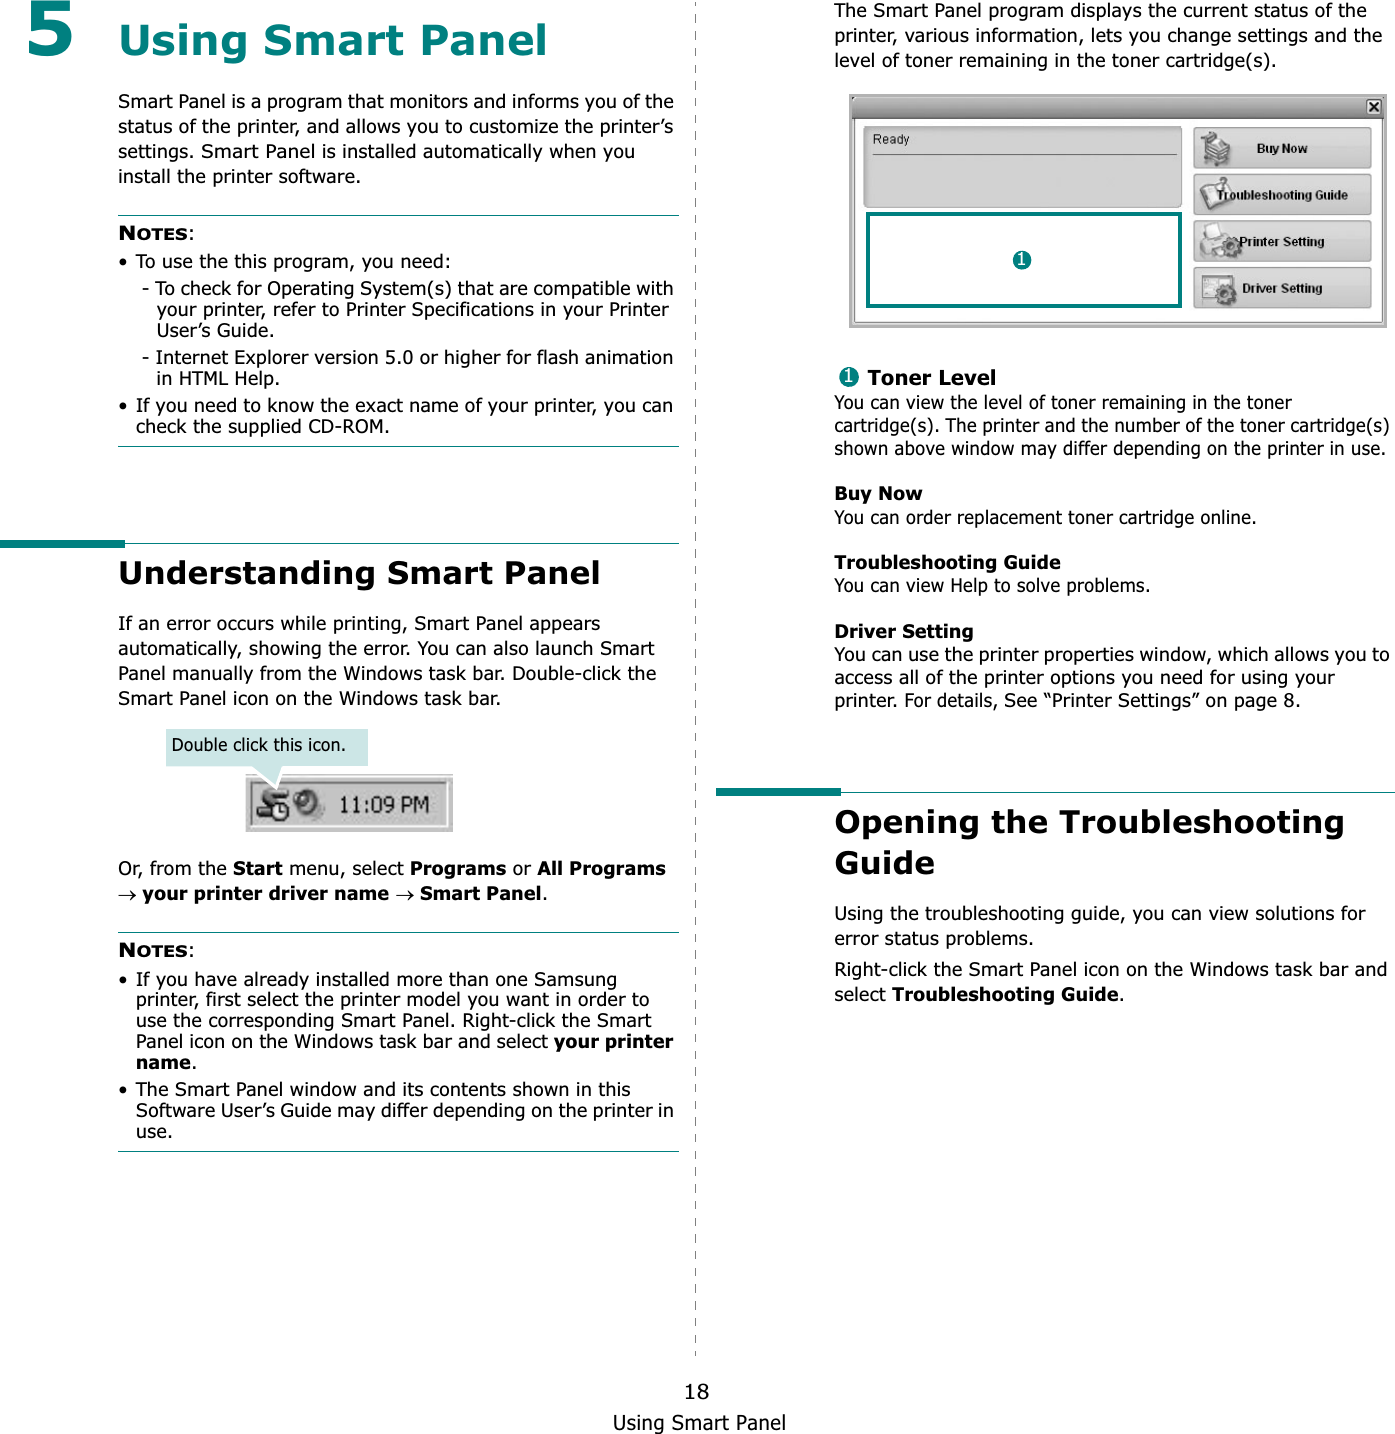 Using Smart Panel185Using Smart PanelSmart Panel is a program that monitors and informs you of the status of the printer, and allows you to customize the printer’s settings.Smart Panel is installed automatically when you install the printer software.NOTES:• To use the this program, you need:- To check for Operating System(s) that are compatible with your printer, refer to Printer Specifications in your Printer User’s Guide.- Internet Explorer version 5.0 or higher for flash animation in HTML Help.• If you need to know the exact name of your printer, you can check the supplied CD-ROM.Understanding Smart PanelIf an error occurs while printing, Smart Panel appears automatically, showing the error. You can also launch Smart Panel manually from the Windows task bar. Double-click the Smart Panel icon on the Windows task bar.Or, from the Start menu, select Programs or All Programsoyour printer driver nameoSmart Panel.NOTES:• If you have already installed more than one Samsung printer, first select the printer model you want in order to use the corresponding Smart Panel. Right-click the Smart Panel icon on the Windows task bar and select your printer name.• The Smart Panel window and its contents shown in this Software User’s Guide may differ depending on the printer in use.Double click this icon.The Smart Panel program displays the current status of the printer, various information, lets you change settings and the level of toner remaining in the toner cartridge(s).Toner LevelYou can view the level of toner remaining in the toner cartridge(s). The printer and the number of the toner cartridge(s) shown above window may differ depending on the printer in use.Buy NowYou can order replacement toner cartridge online.Troubleshooting GuideYou can view Help to solve problems.Driver SettingYou can use the printer properties window, which allows you to access all of the printer options you need for using your printer. For details, See “Printer Settings” on page 8.Opening the Troubleshooting GuideUsing the troubleshooting guide, you can view solutions for error status problems.Right-click the Smart Panel icon on the Windows task bar and selectTroubleshooting Guide.11